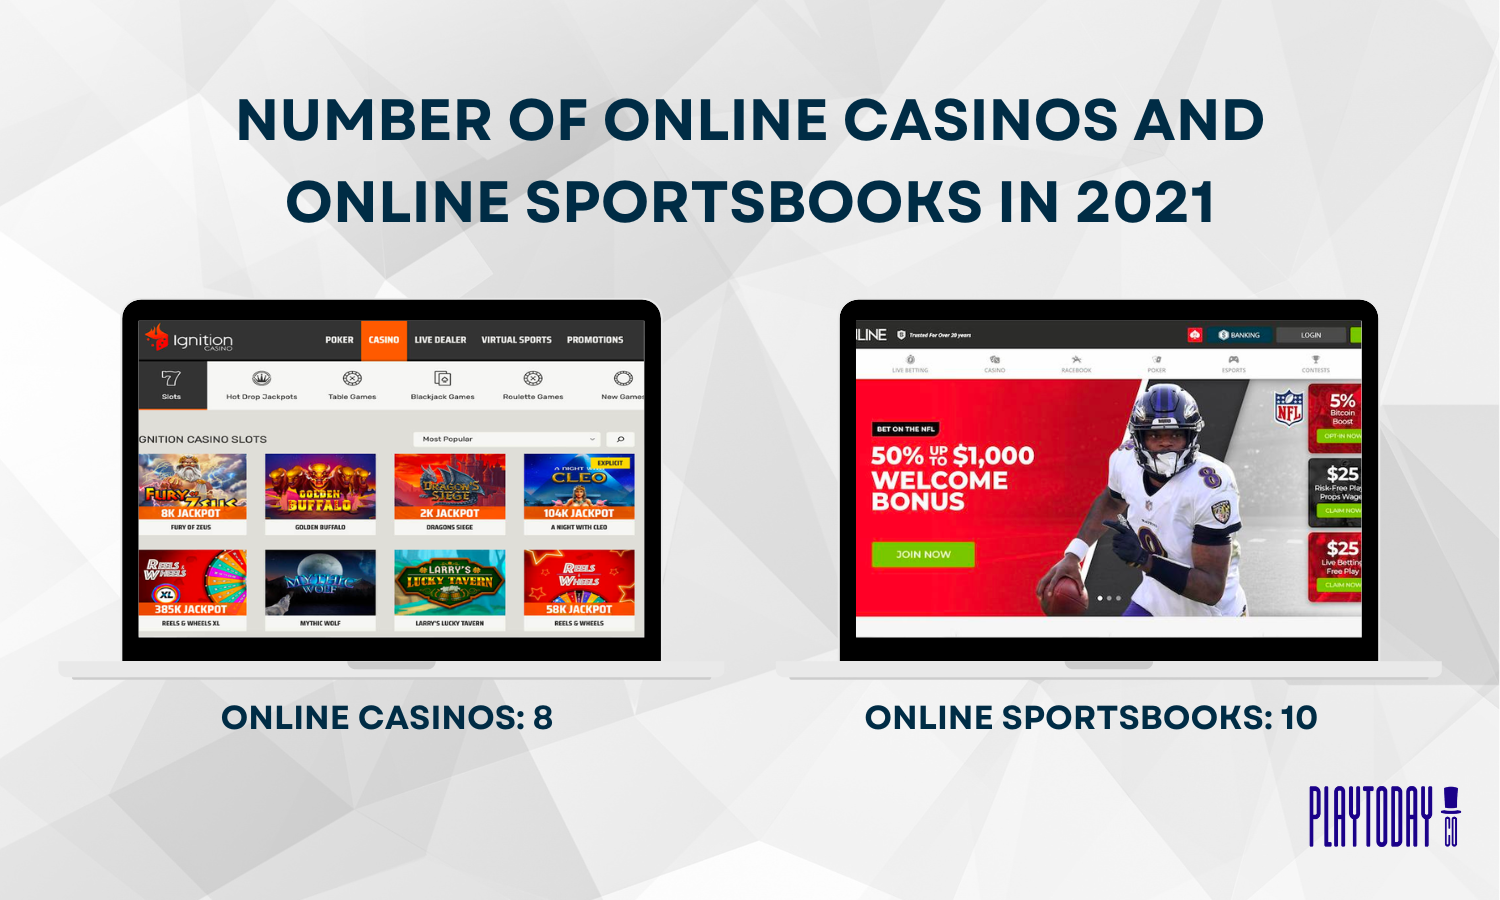 Number of Online Casinos and Sportsbooks in MI in 2021